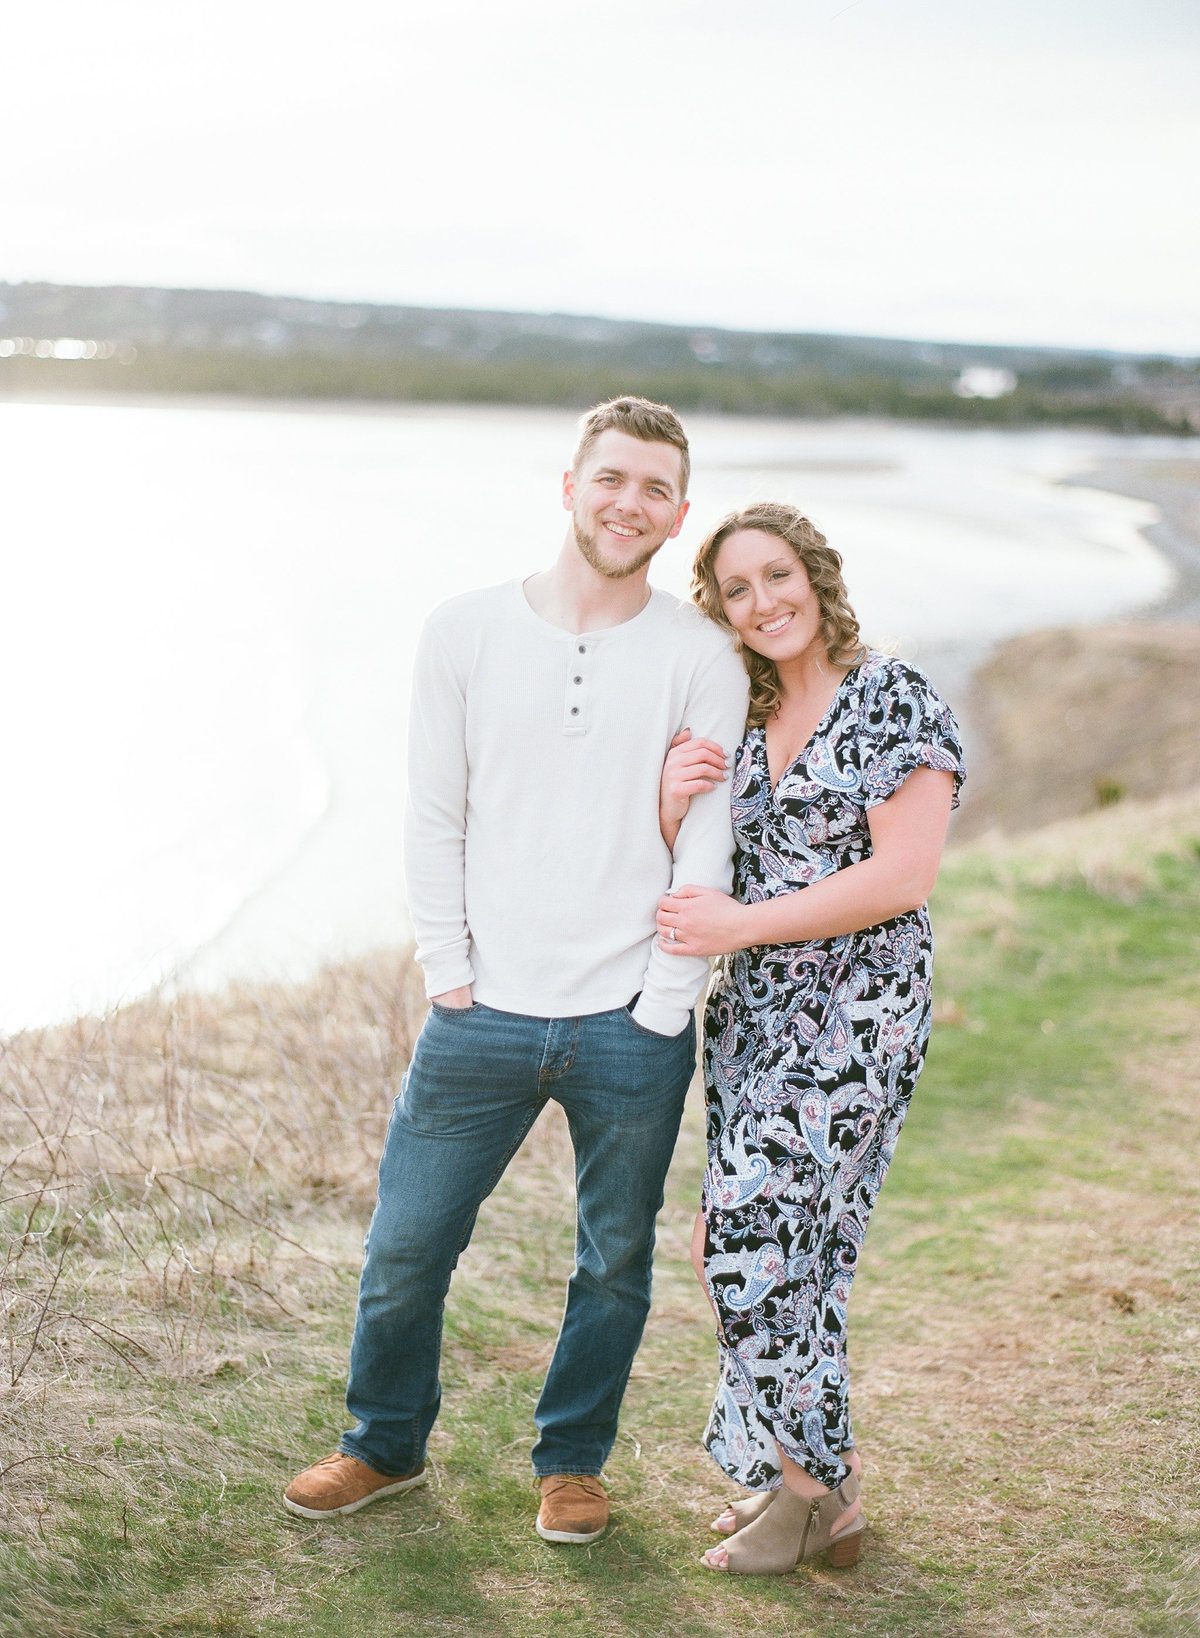 Jacqueline Anne Photography - Akayla and Andrew - Lawrencetown Beach-31